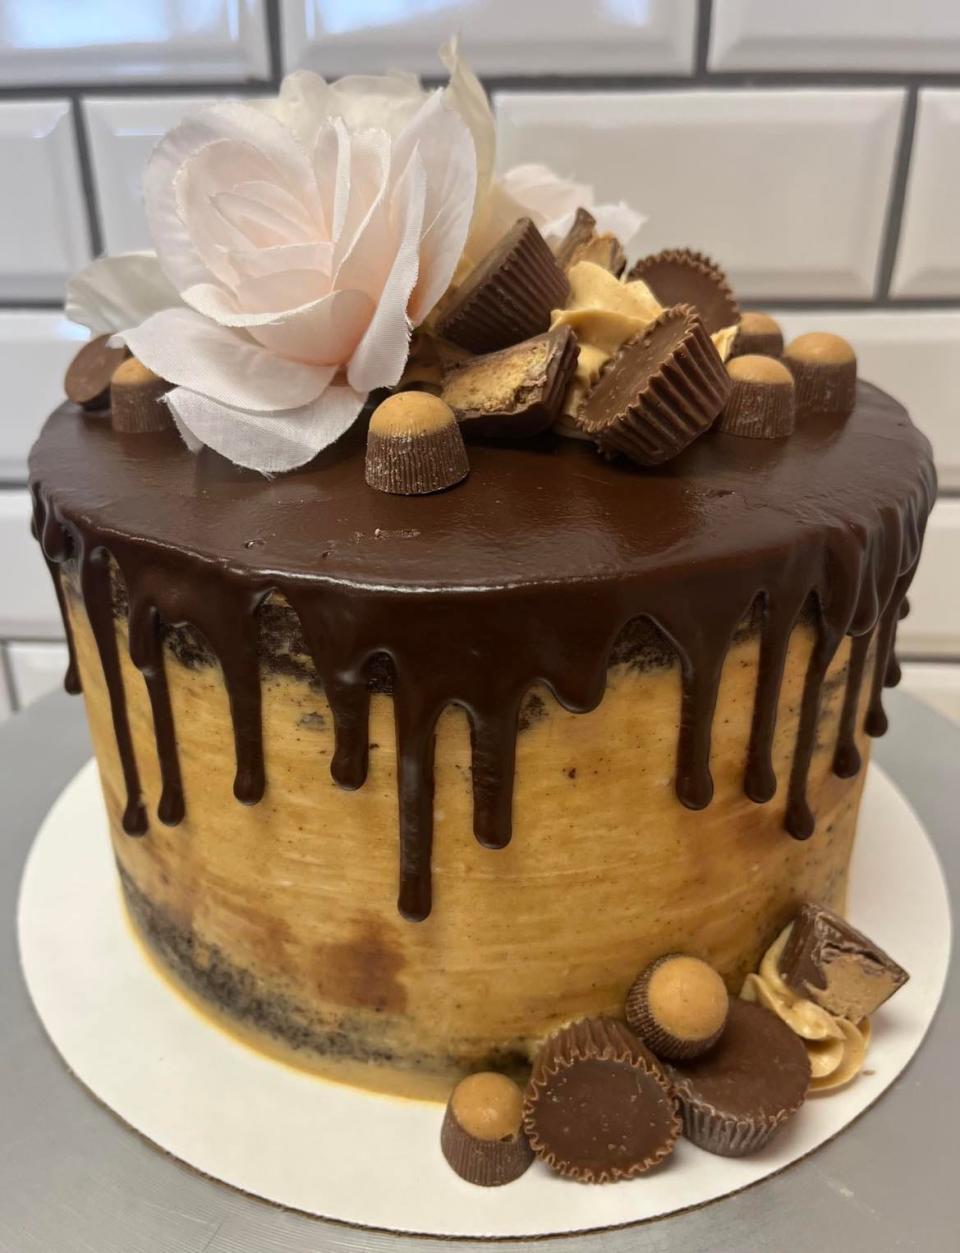 Pre-ordered specialty cakes are among the many offerings at Stuffed Pastry in North Canton, opened earlier this year by former Las Vegas resort baker Elisabeth Park.